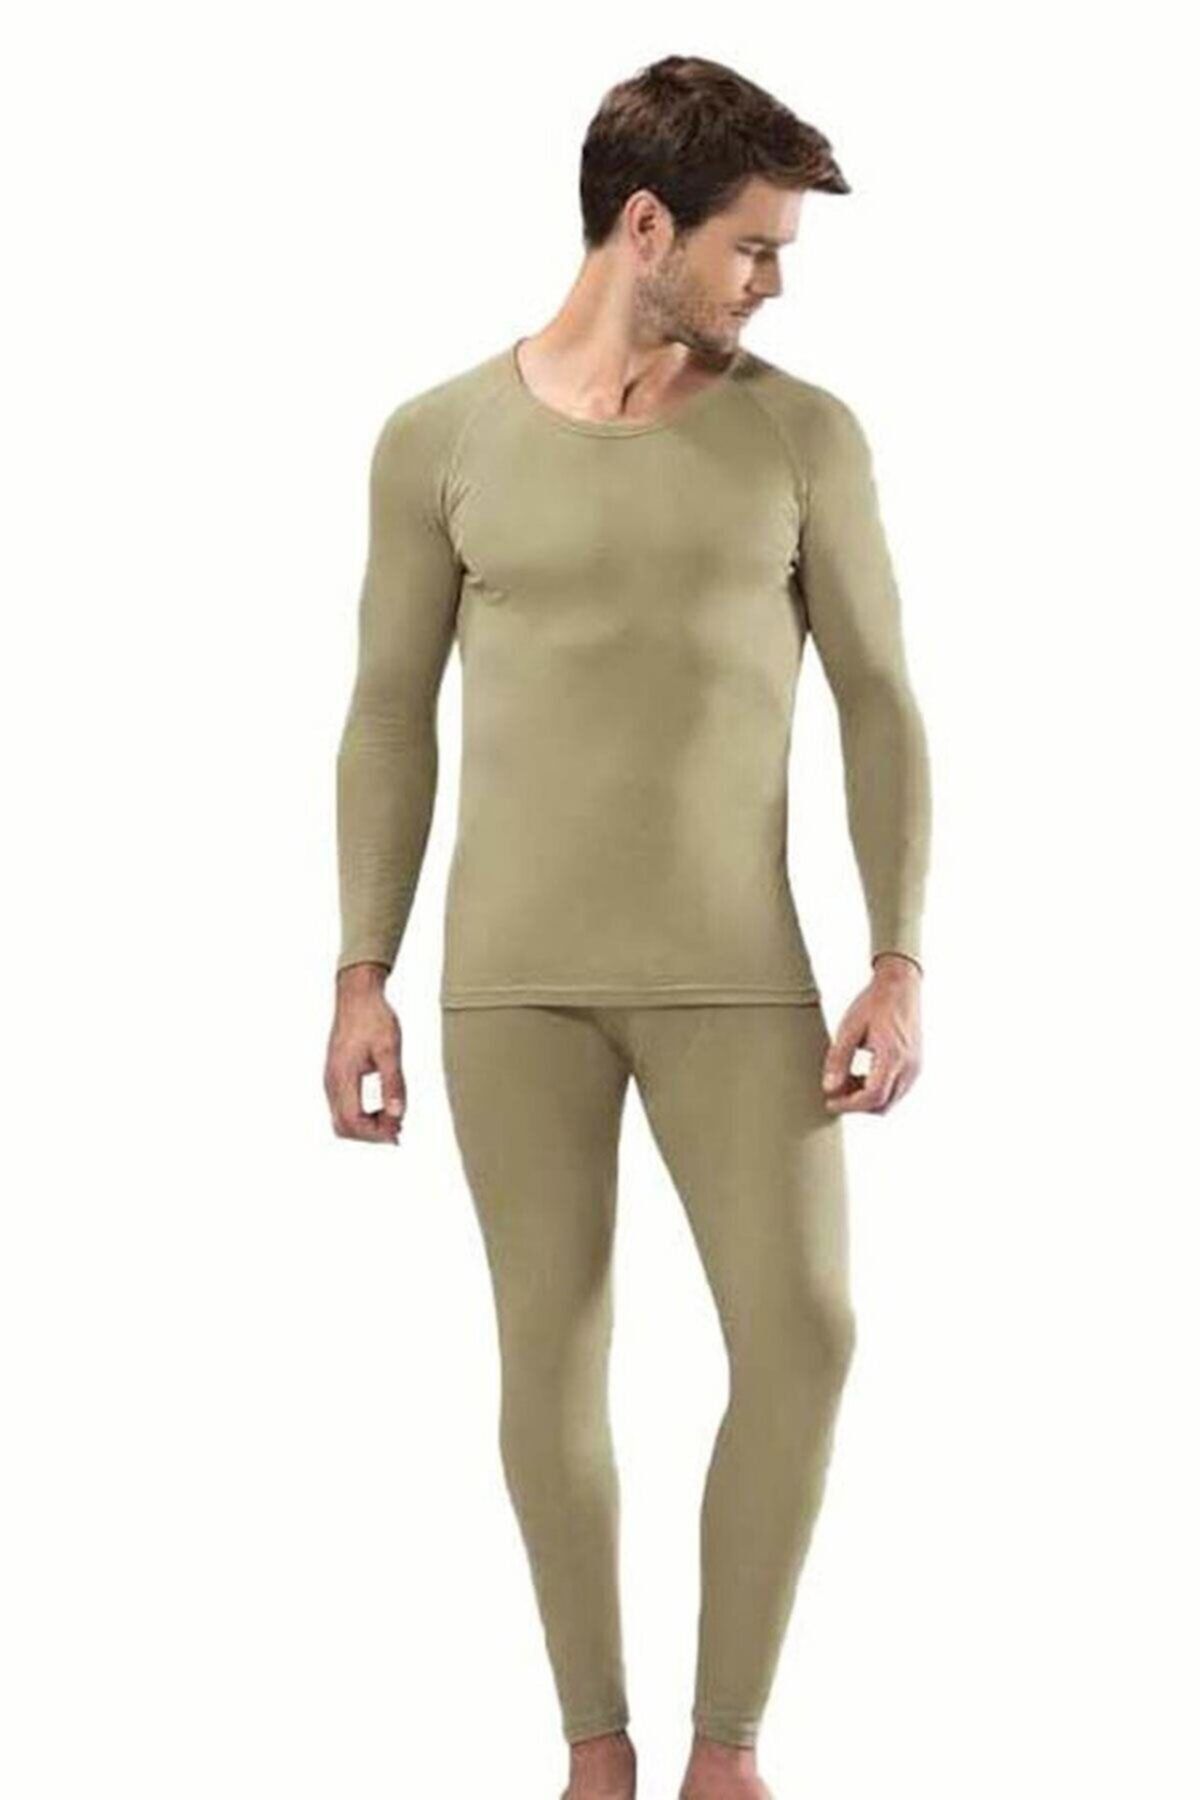 Katmirra Professional Outdoor Men's Military Thermal Underwear Suit